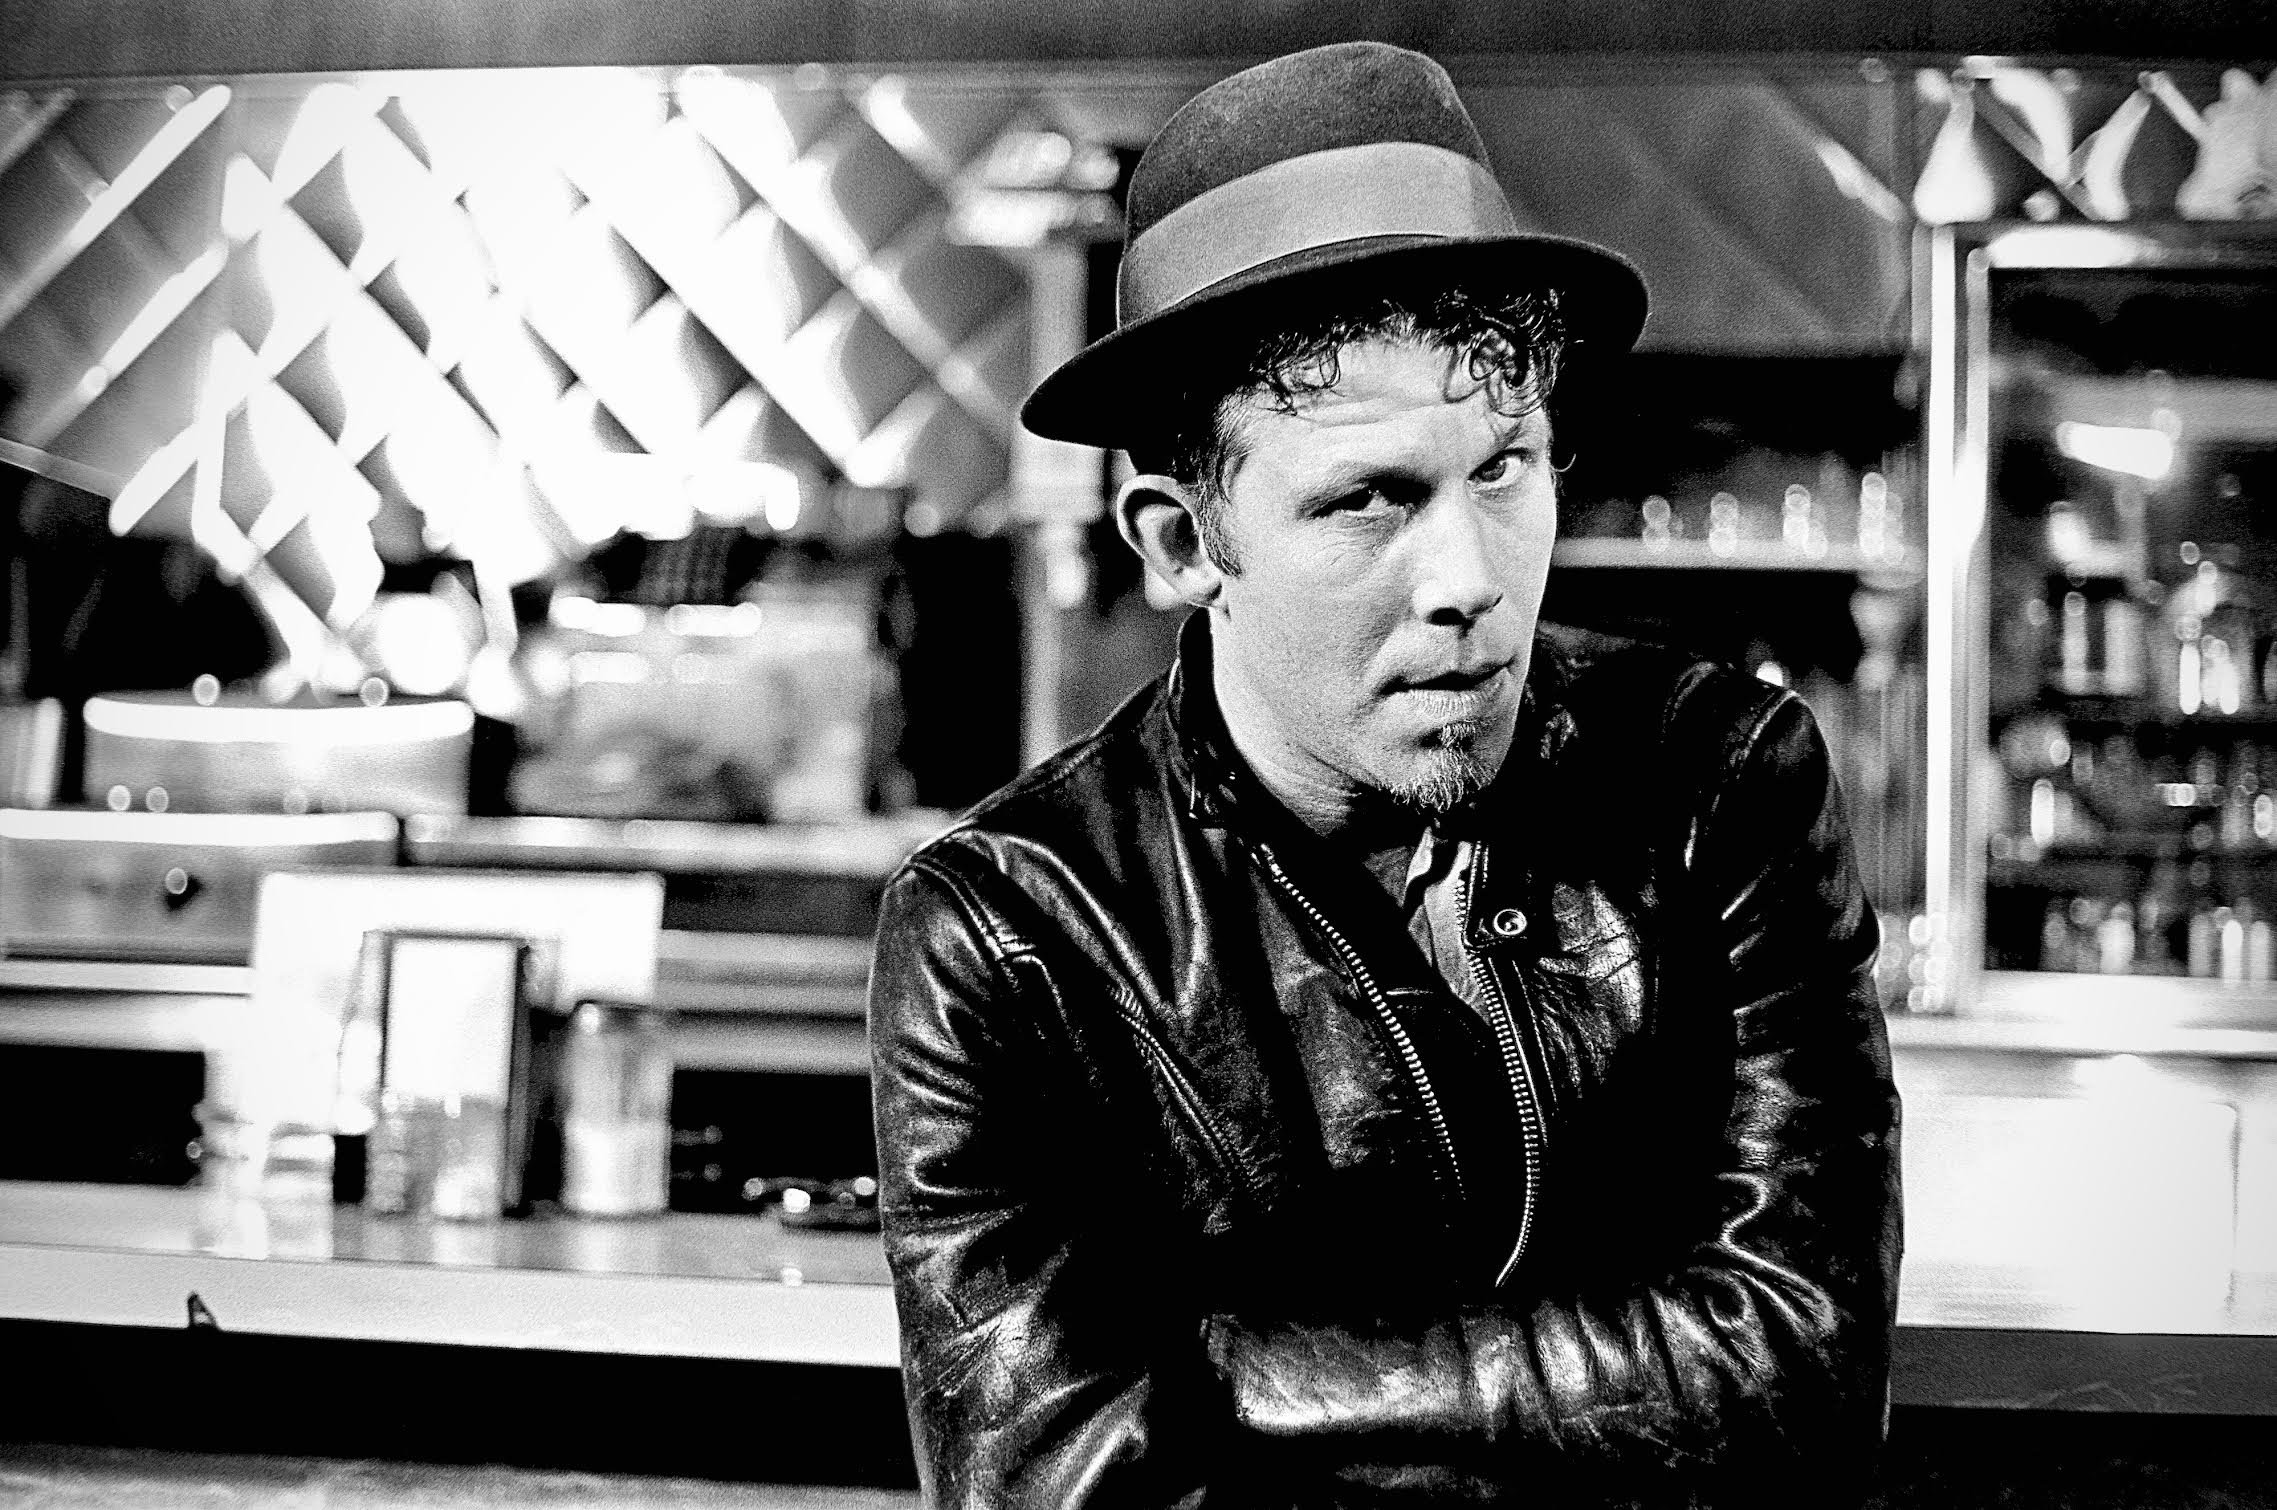  Tom Waits, photographed in the Travelers Cafe, Los Angeles, CA, 1985. Photograph by Edward Colver. 